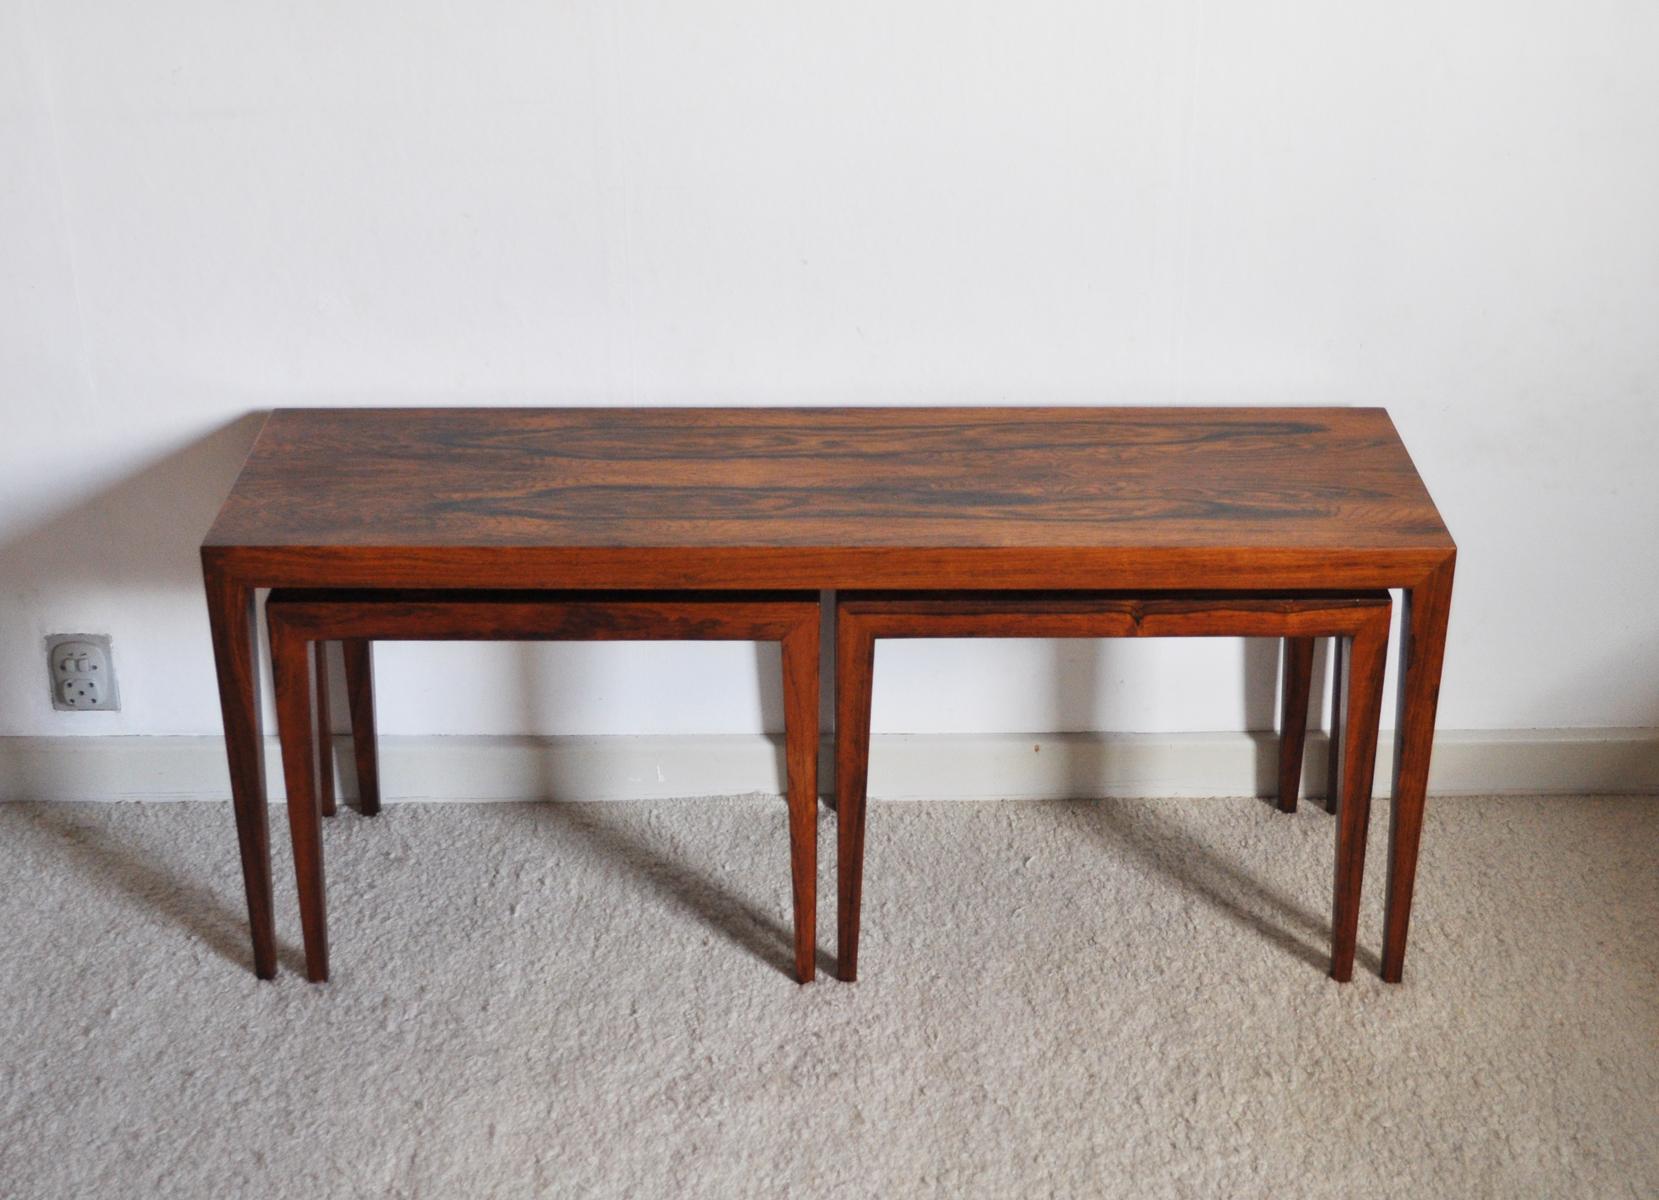 Beautiful set of one large table and two nesting tables made in Brazilian rosewood. Designed by Severin Hansen Jr. in the 1960s and manufactured by Haslev Møbelsnedkeri in the same period. Model the no. 41B, labeled.

Good vintage condition, signs